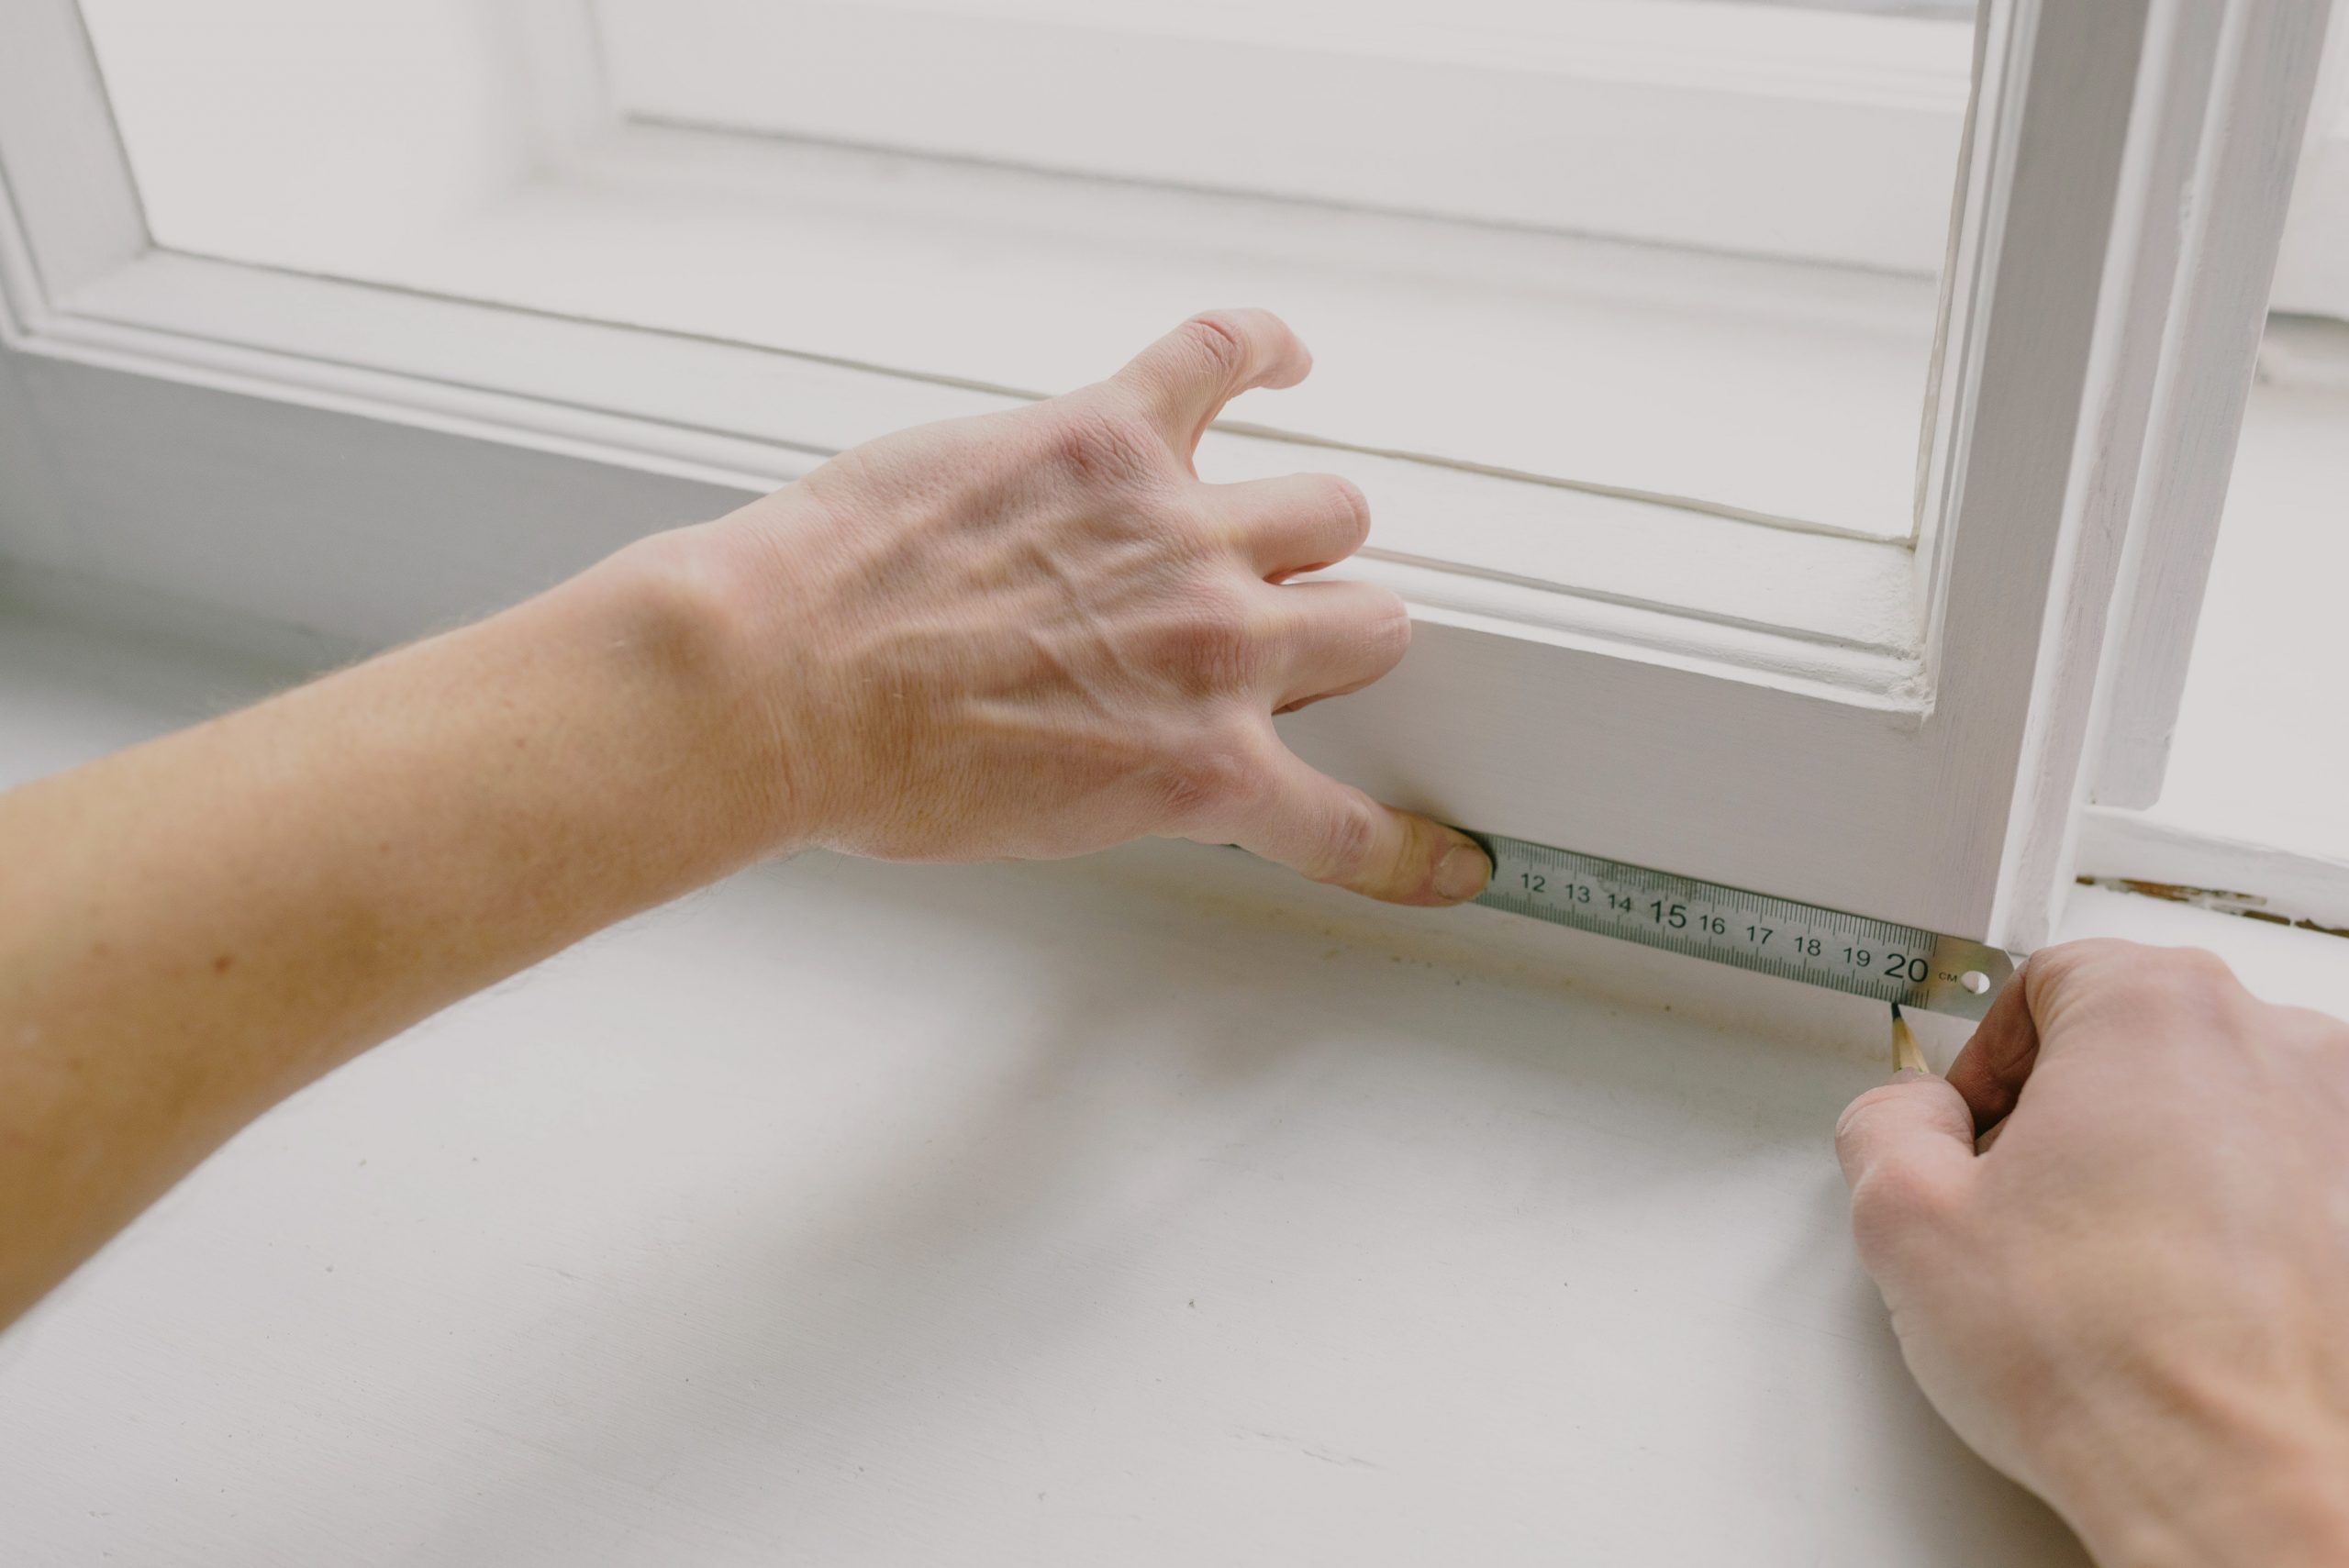 How to measure windows correctly? Use these useful tips from our Expert!